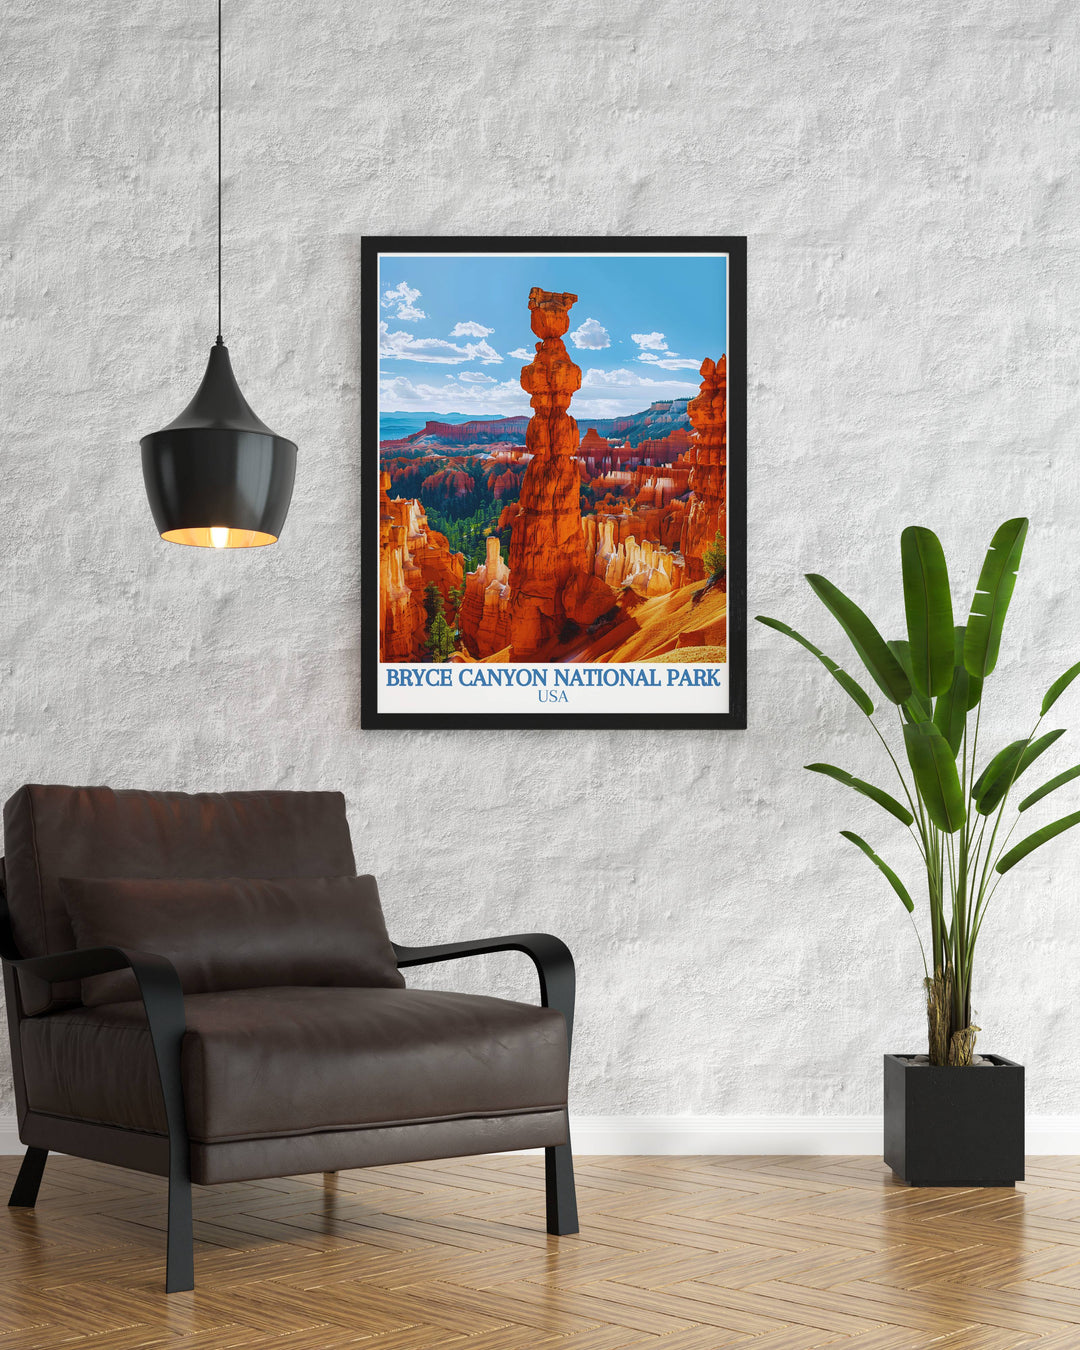 High quality Bryce Canyon photo showcasing the awe inspiring views of Thor's Hammer. Perfect for adding a touch of nature to your home decor. Available as a digital download for easy at home printing and immediate display.